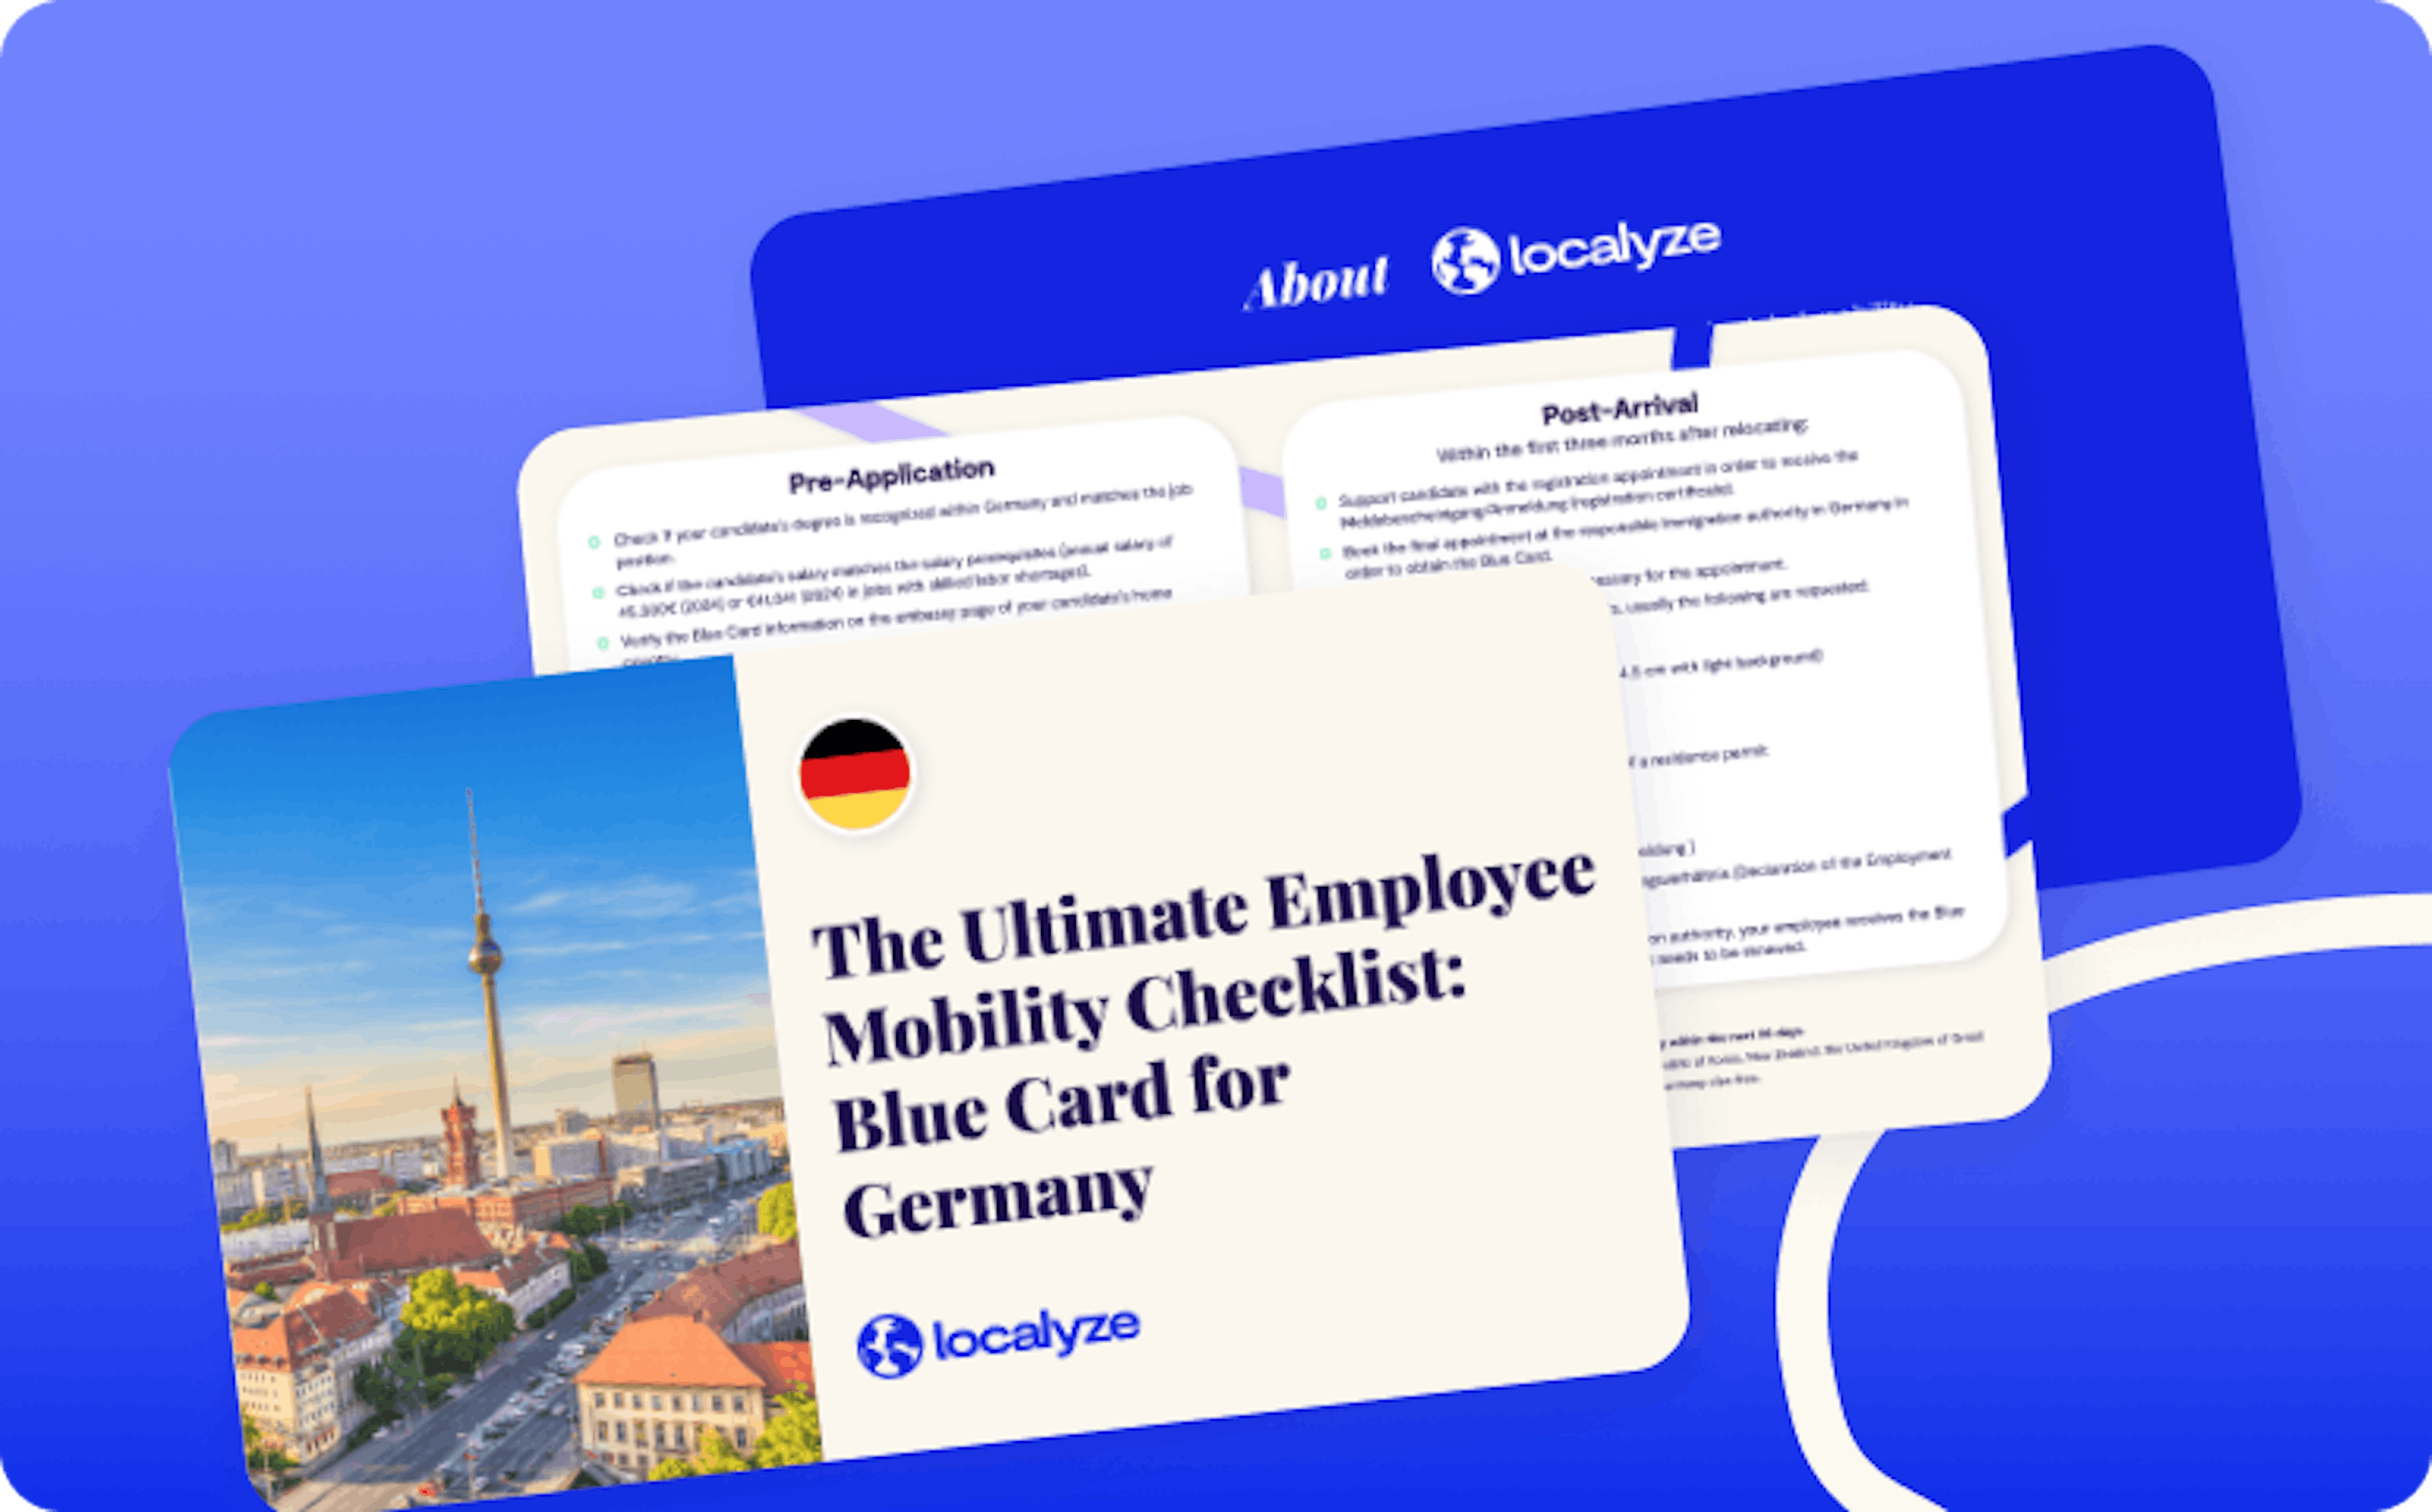 The ultimate employee mobility checklist - EU Blue Card for Germany